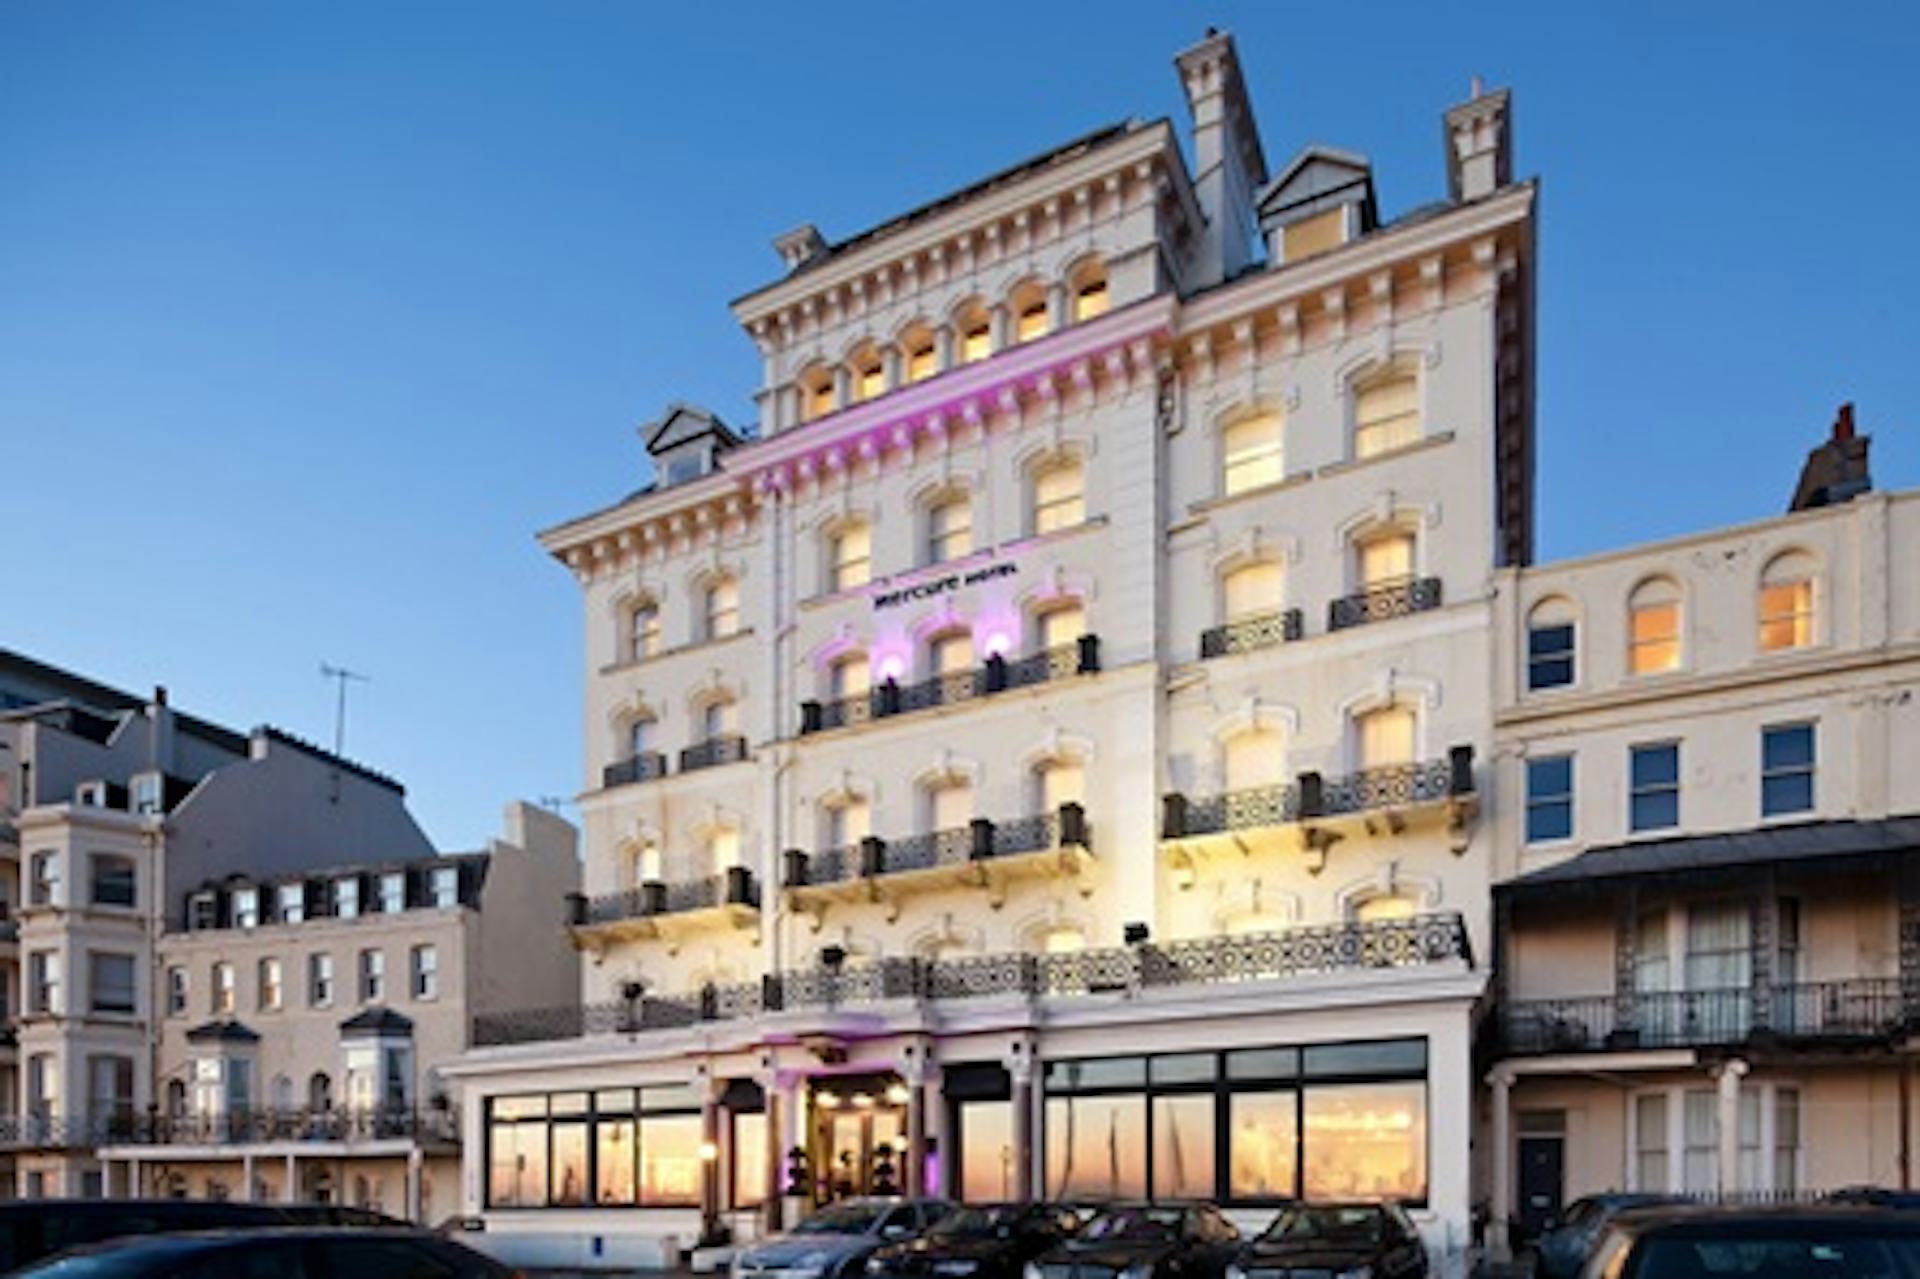 Two Night Break for Two at the Mercure Brighton Seafront Hotel